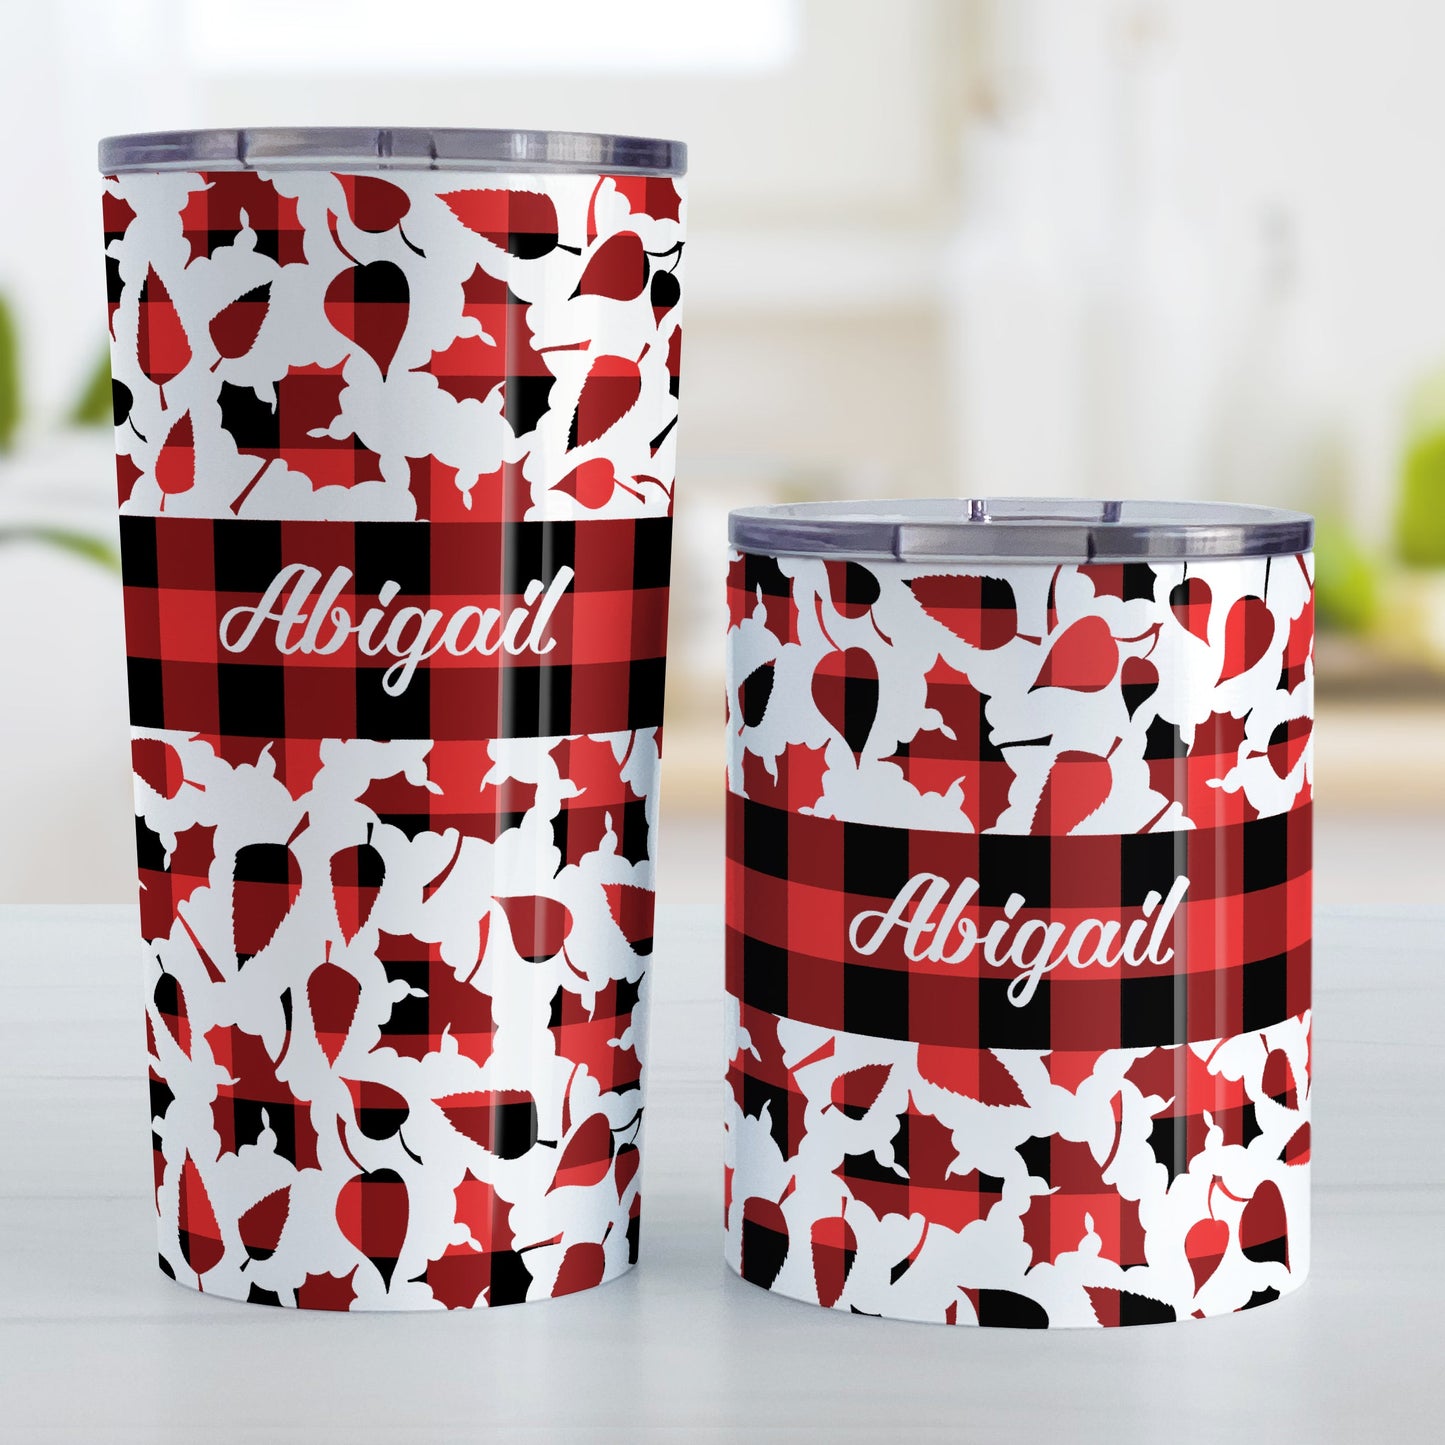 Personalized Buffalo Plaid Leaves Fall Tumbler Cup (20oz or 10oz) at Amy's Coffee Mugs. Stainless steel insulated tumbler cups designed with a pattern of leaves with a red and black buffalo plaid pattern that wraps around the cups. There is a buffalo plaid stripe over middle area of the leaves with your name custom printed in a white script font.